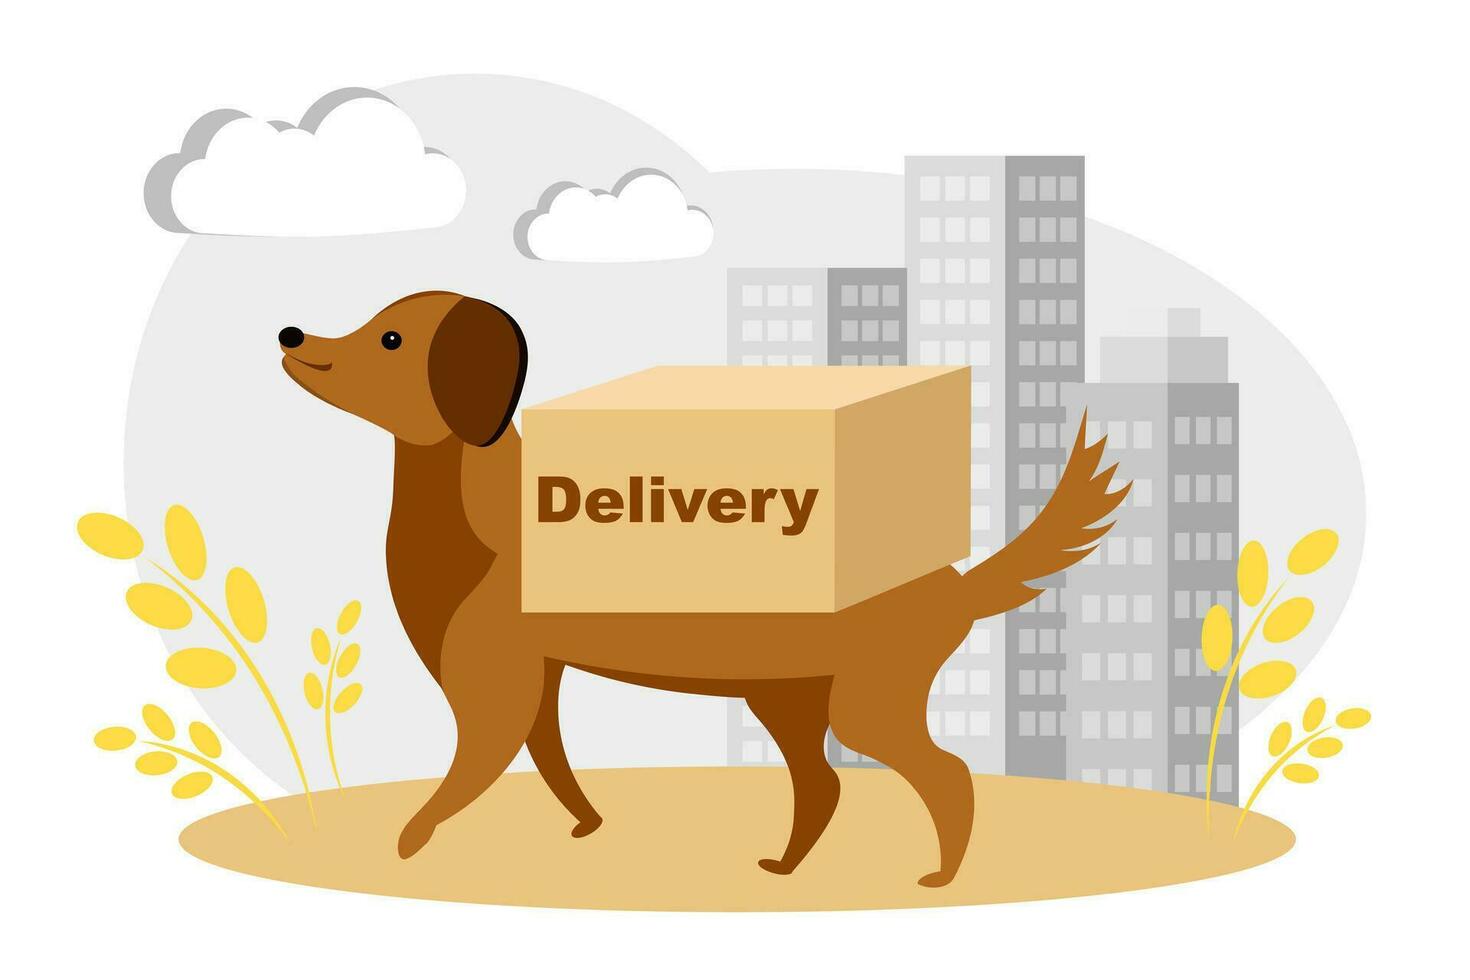 The concept of online delivery, online order tracking, home and office delivery. vector